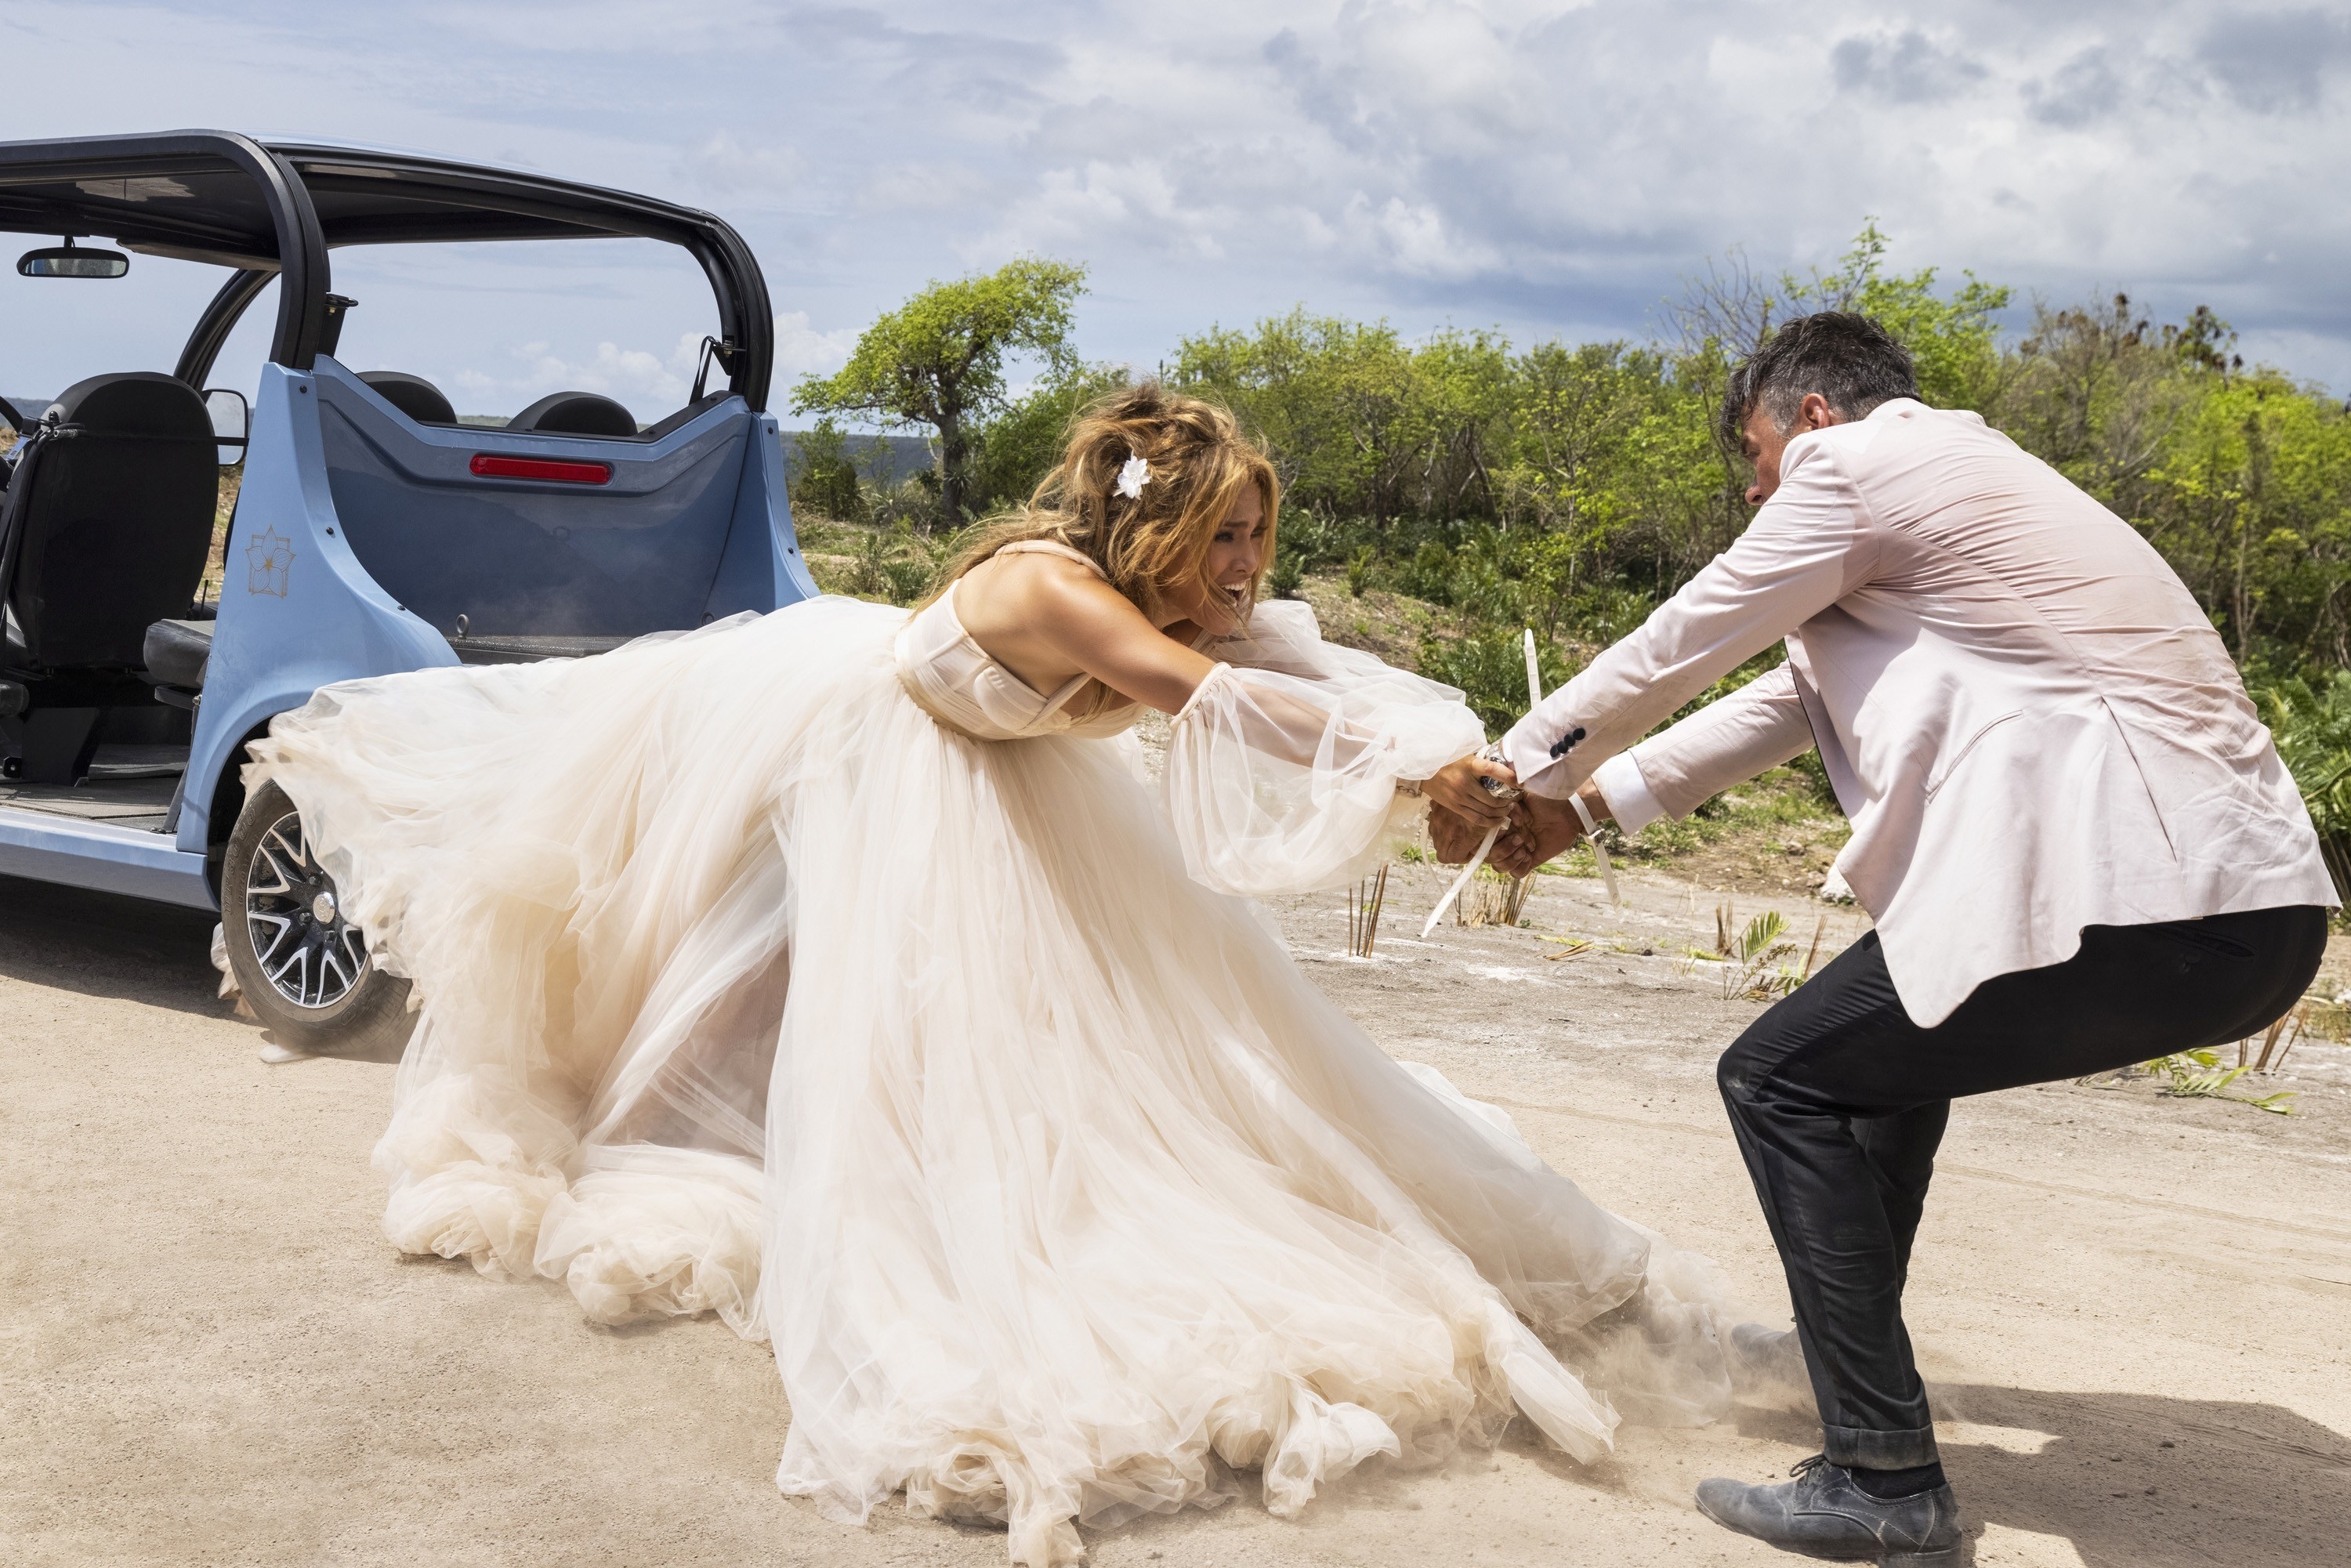 A man tries to pull a woman from a car, but her wedding gown is stuck